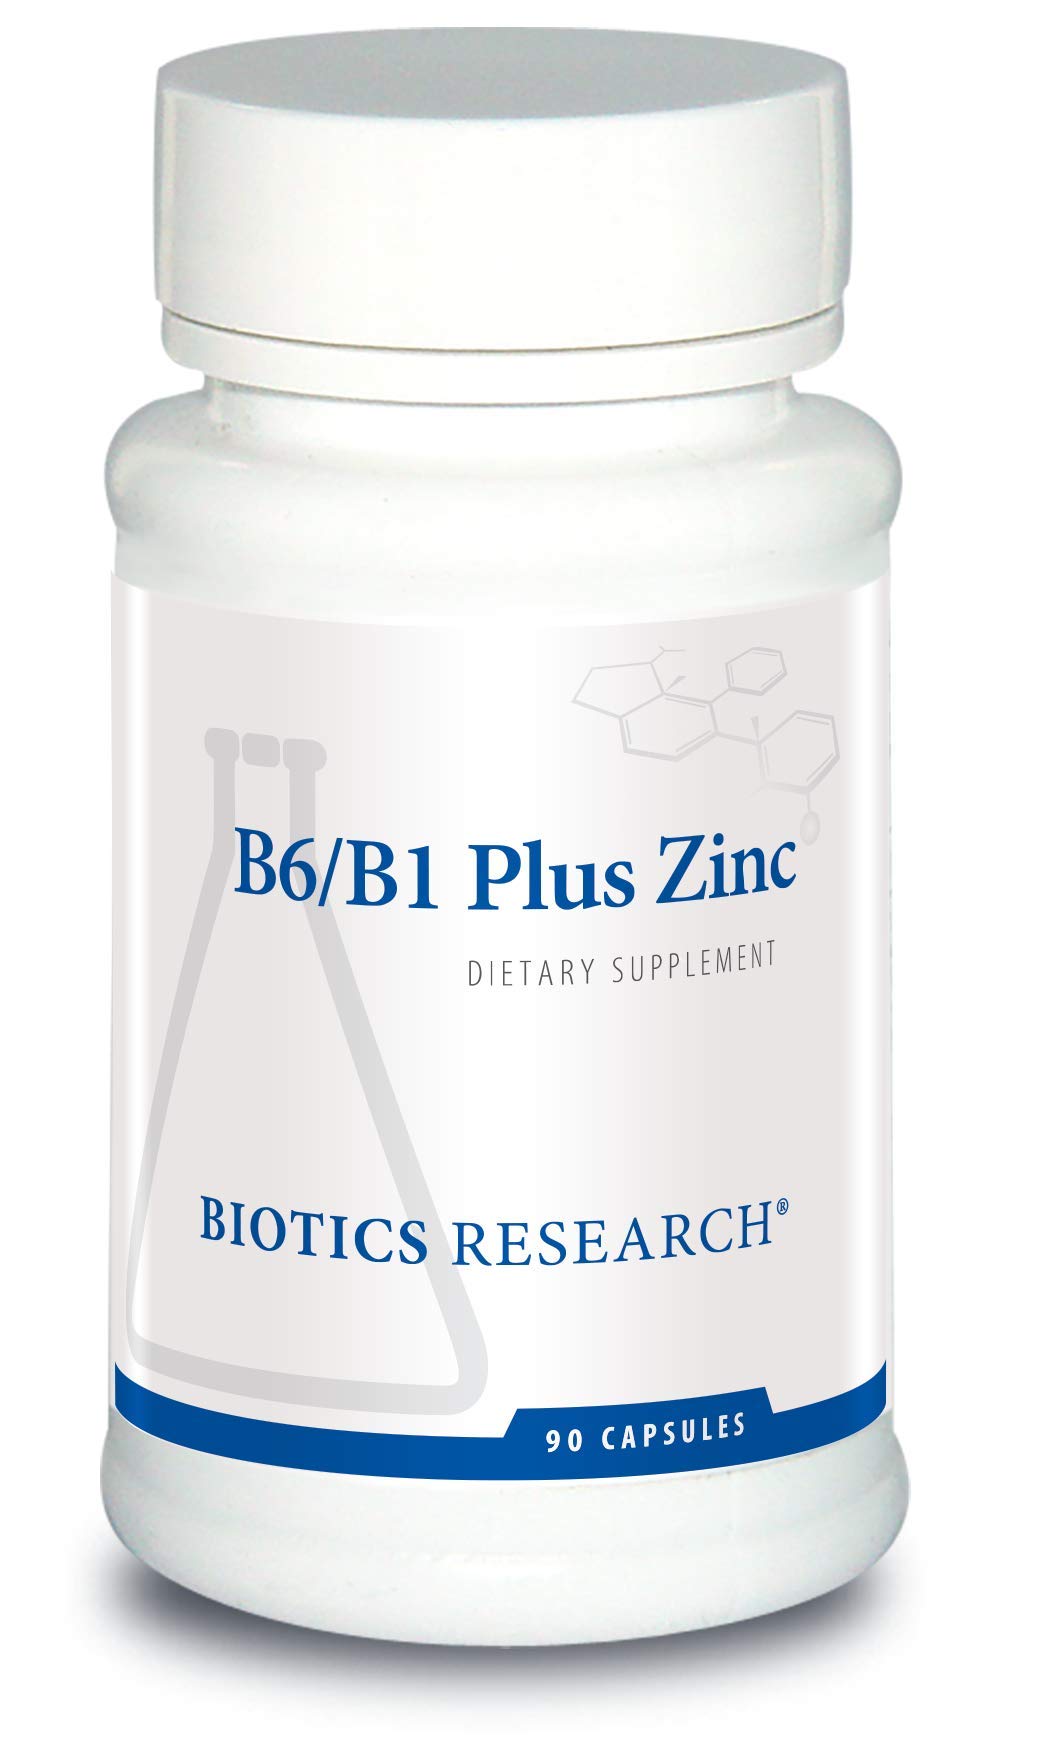 BIOTICS Research B6 B1 Plus Zinc Supplies Active Forms of B Vitamins. 5mg of Highly bioavailable Form of zinc. Aids in Activity of Over 300 Different zinc Dependent enzymes 90 Caps